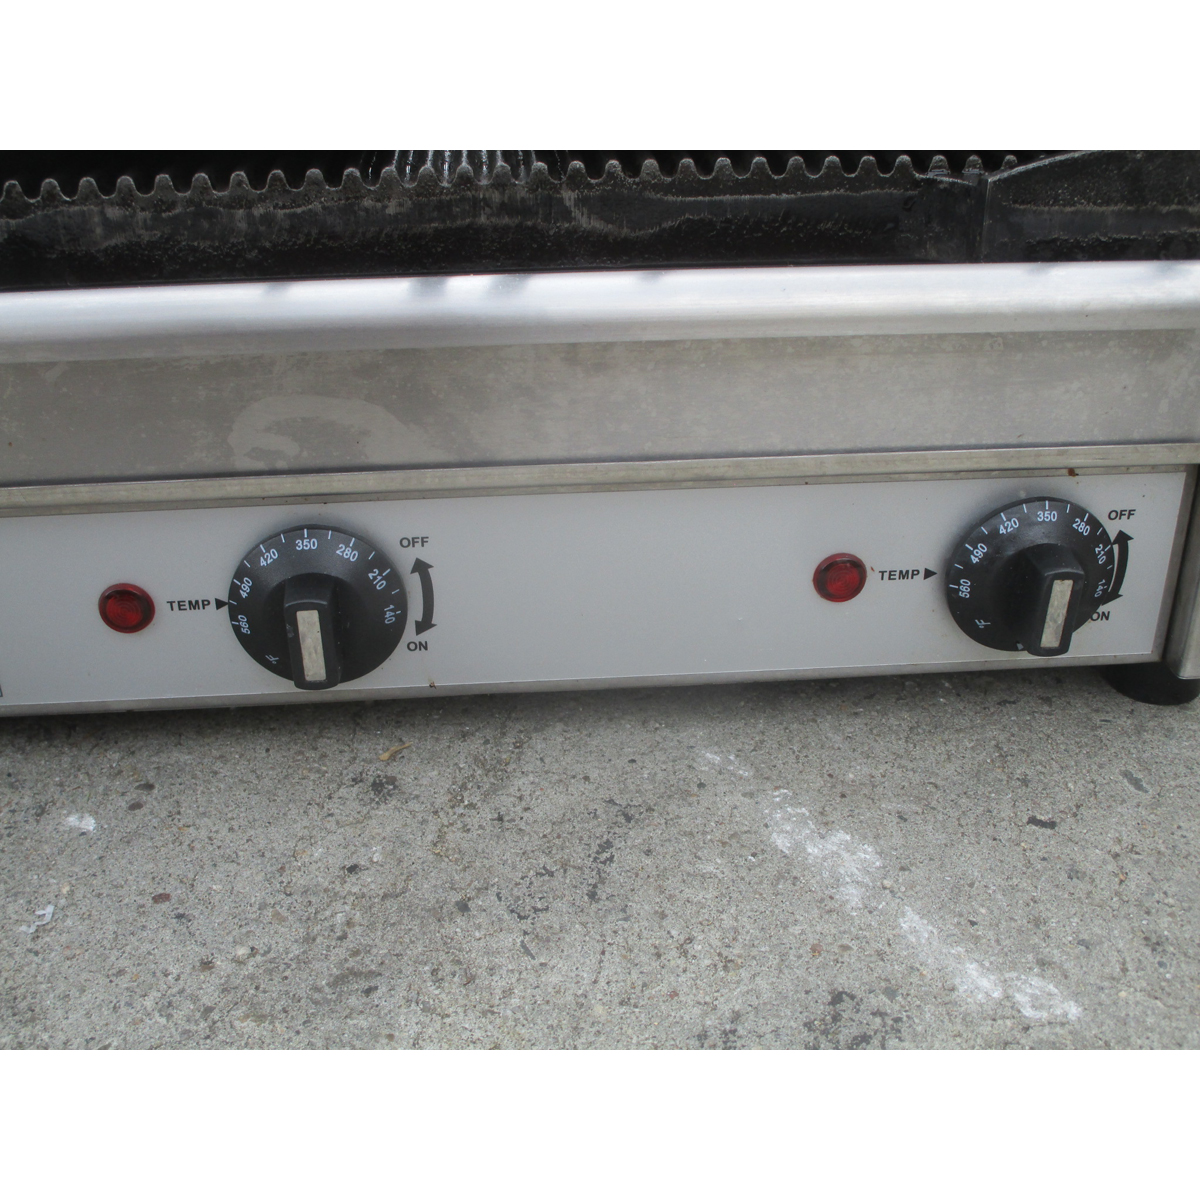 Eurodib SFE02365-240 17" x 10" Double Panini Grill with Grooved Plates, Used Great Condition image 2